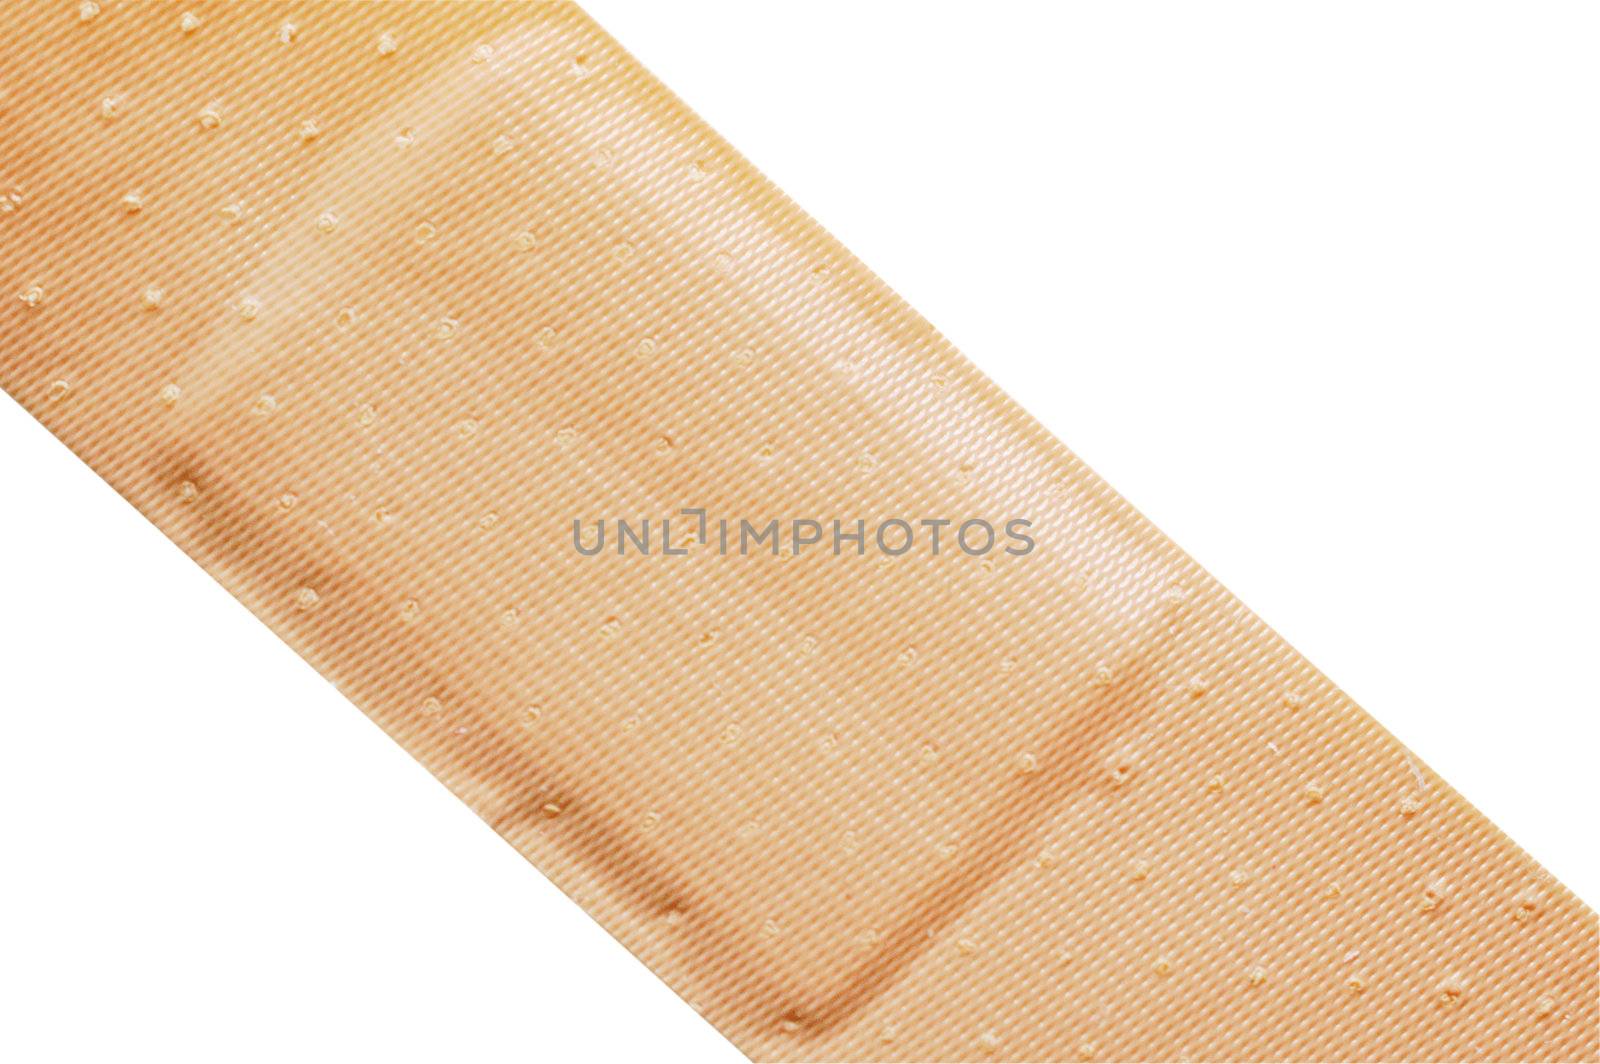 Adhesive bandage with clipping path.